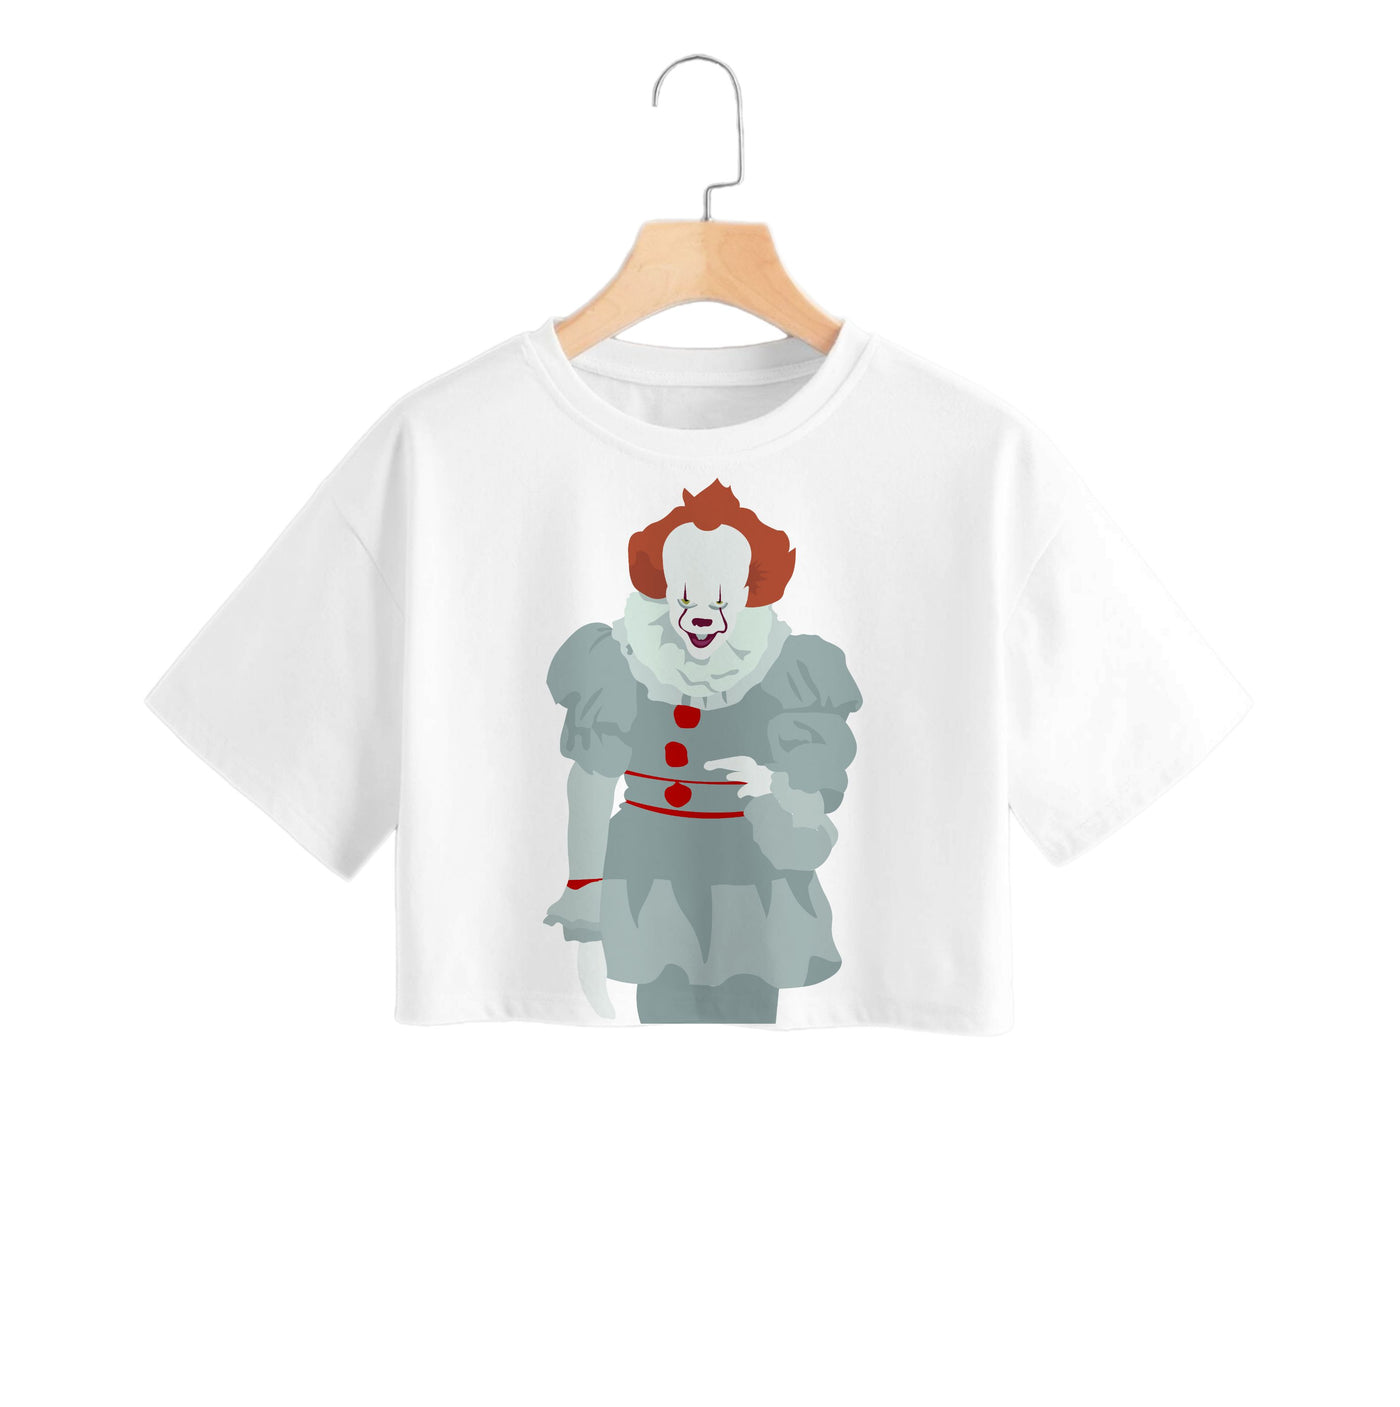 Pennywise - IT The Clown Crop Top